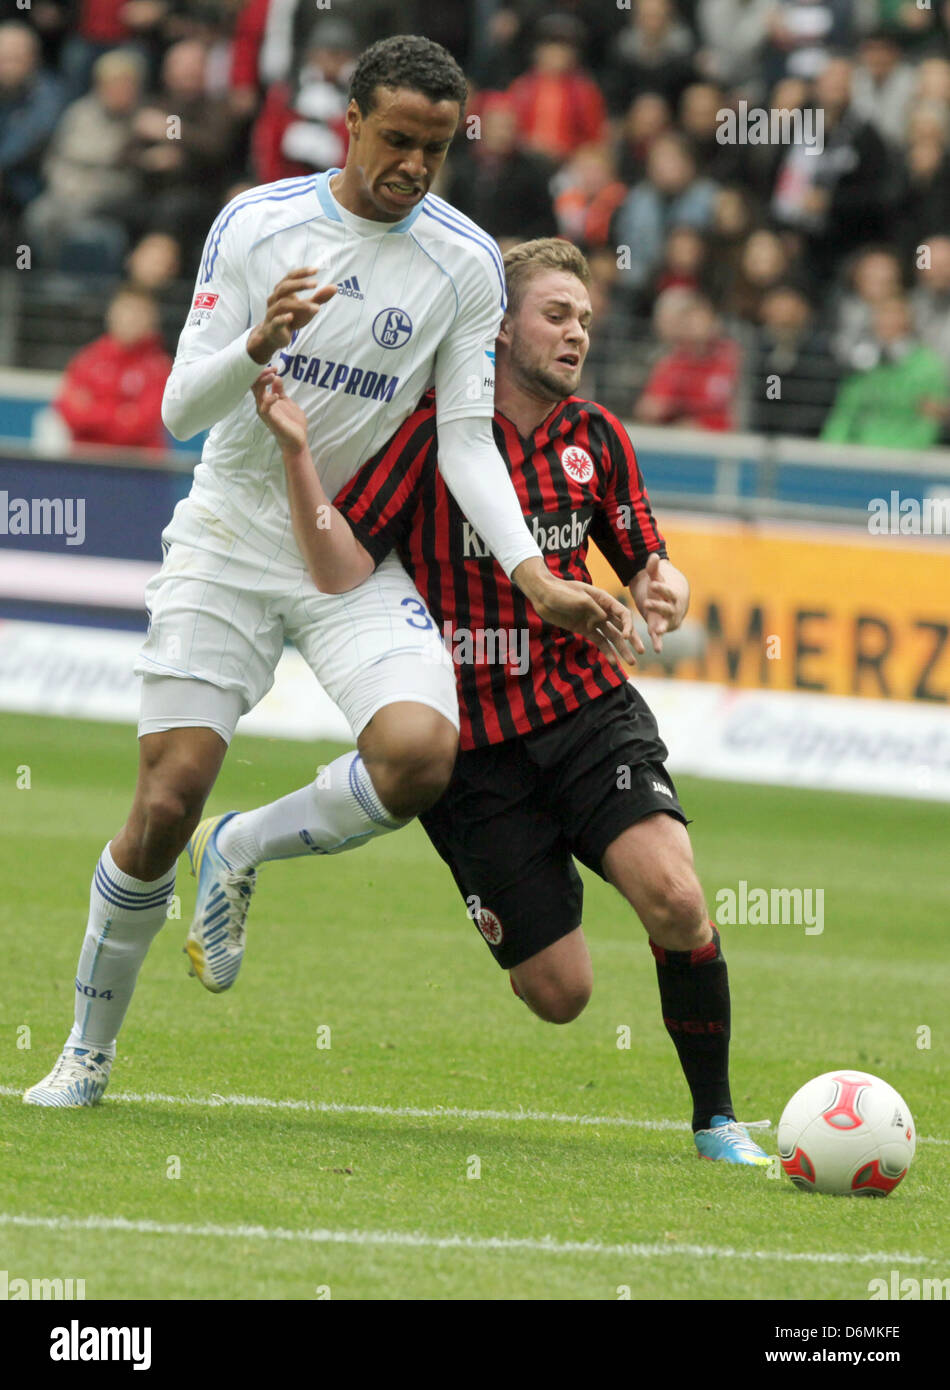 Schalke's Joel Matip (L) vies for the ball with Frankfurt's Marc Stendera (R) during the Bundesliga match Eintracht Frankfurt vs FC Schalke 04 at the Commerzbank-Arena in Frankfurt/Main, Germany, 20 April 2013. Photo: FRANK RUMPENHORST   (ATTENTION: EMBARGO CONDITIONS! The DFL permits the further  utilisation of up to 15 pictures only (no sequntial pictures or video-similar series of pictures allowed) via the internet and online media during the match (including halftime), taken from inside the stadium and/or prior to the start of the match. The DFL permits the unrestricted transmission of dig Stock Photo